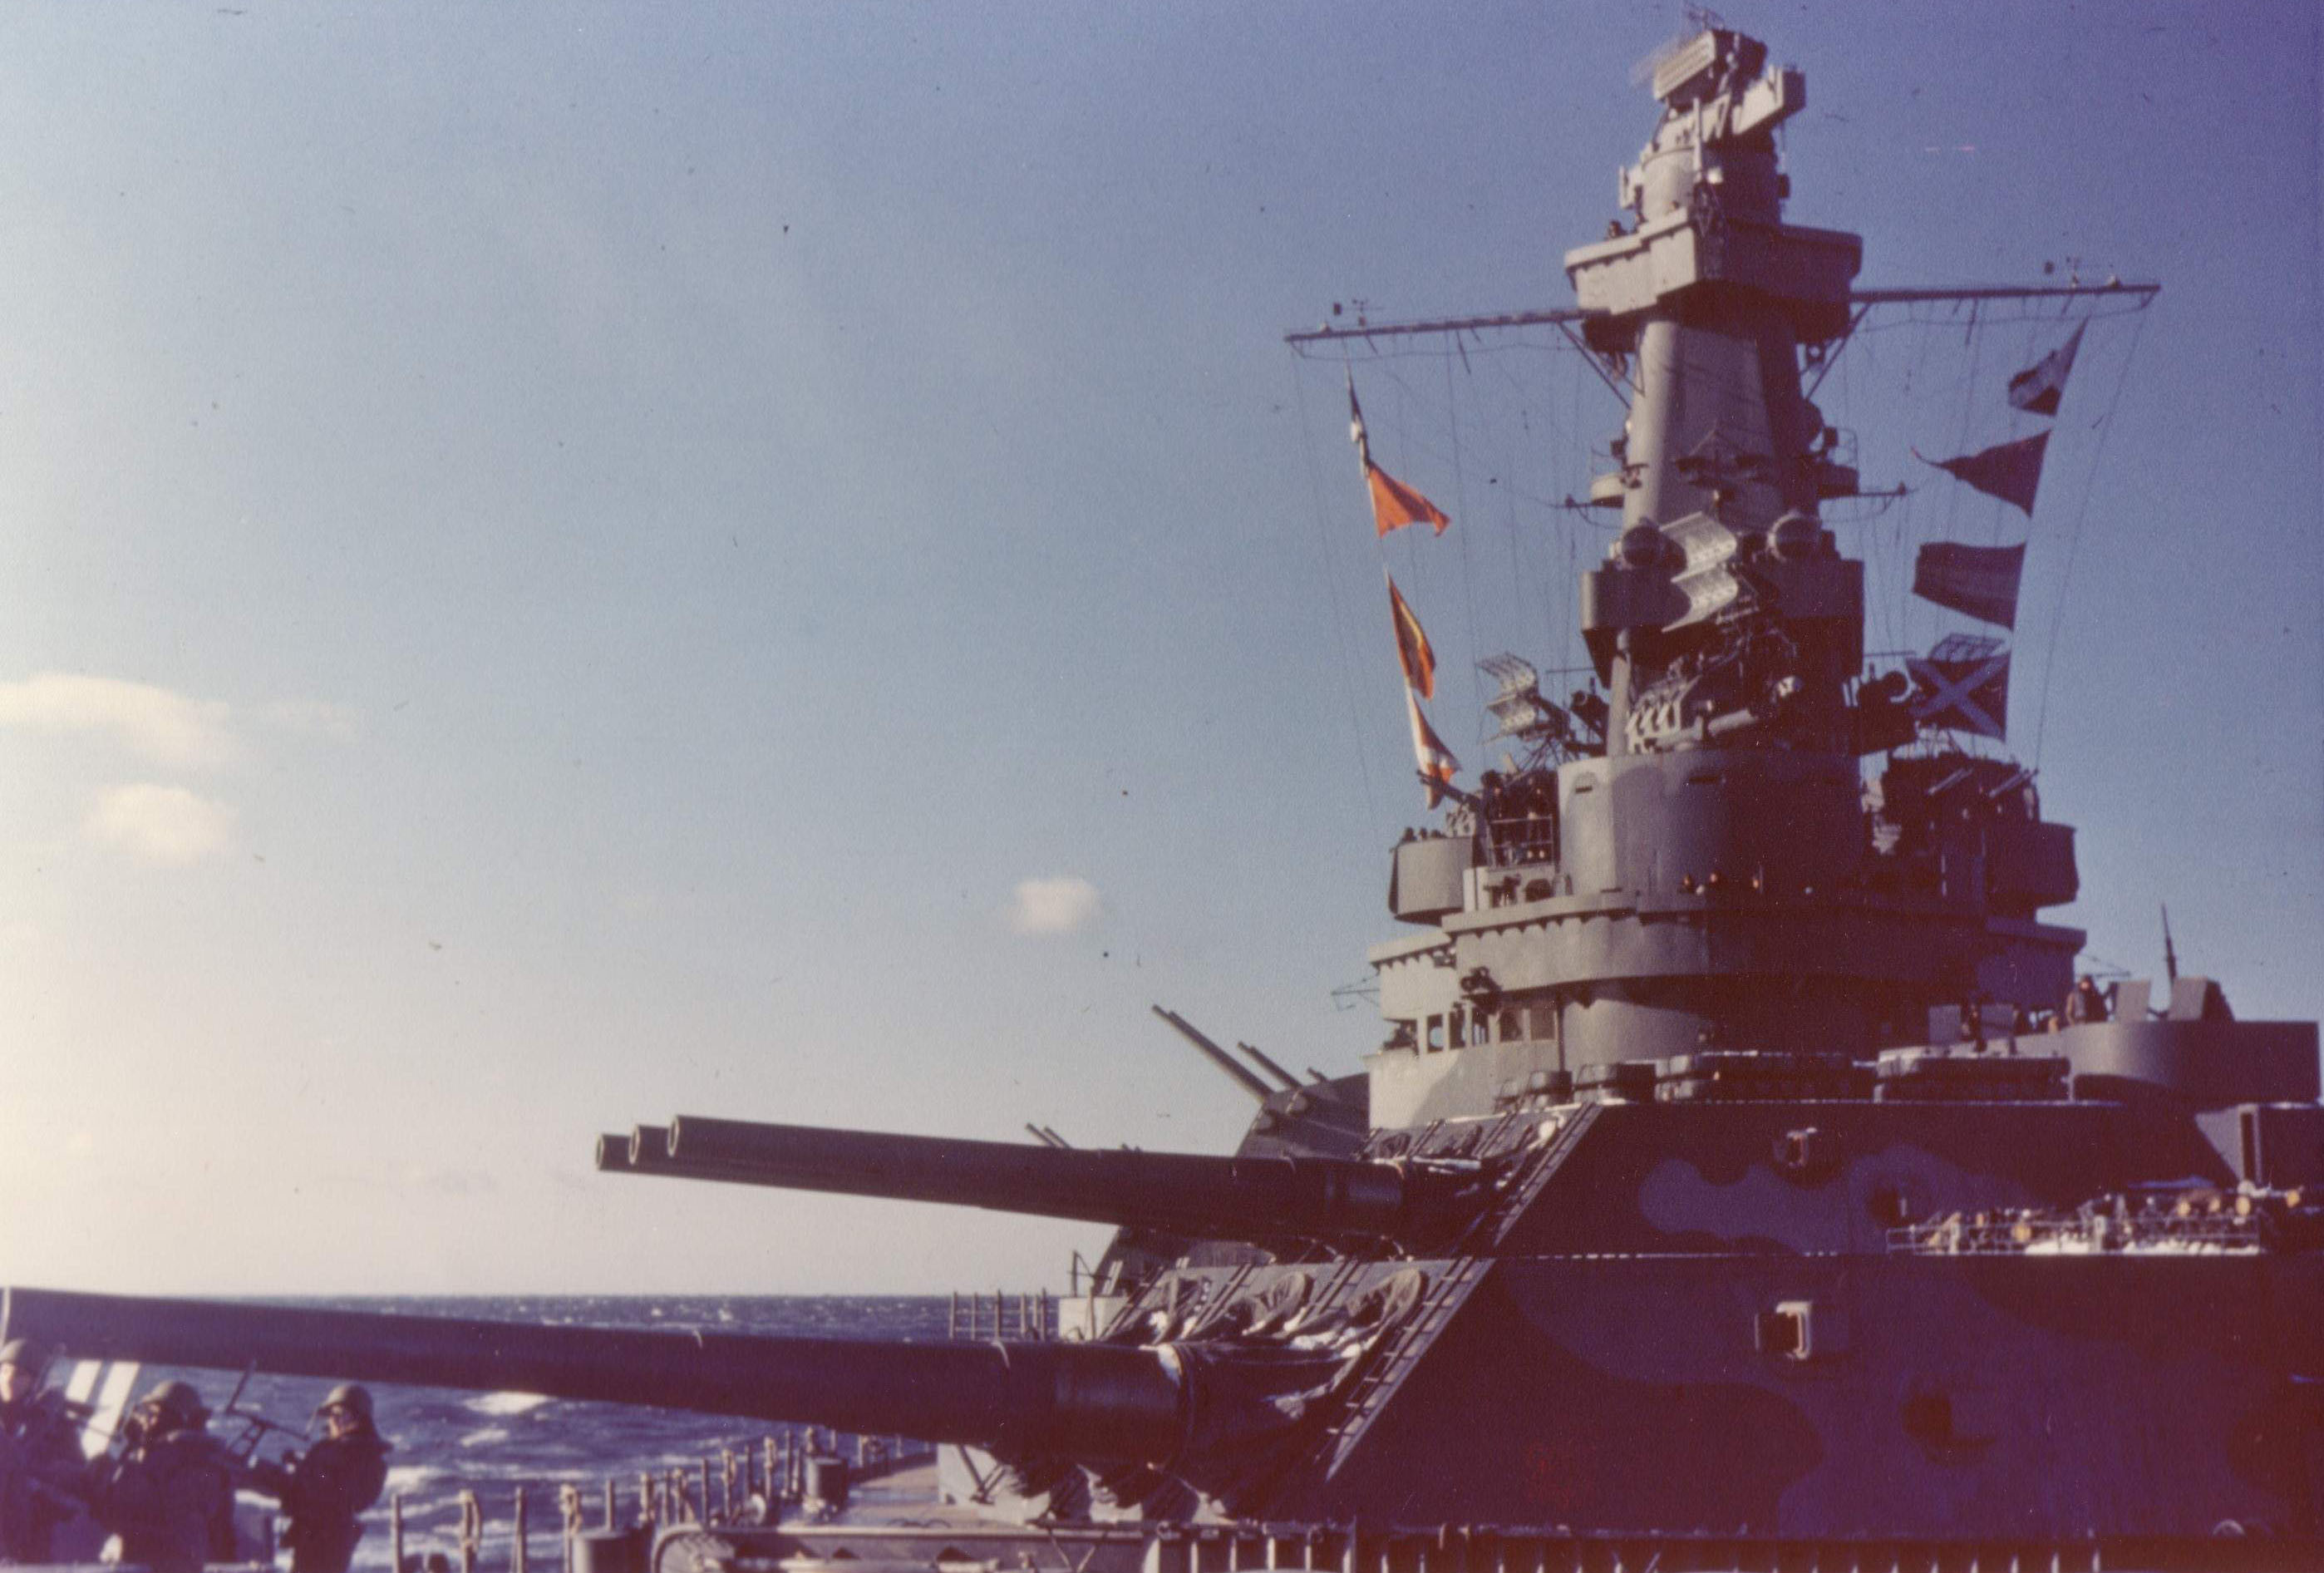 View of USS Alabama from the bow during her shakedown period, Casco Bay, Maine, United States, Jan 1943